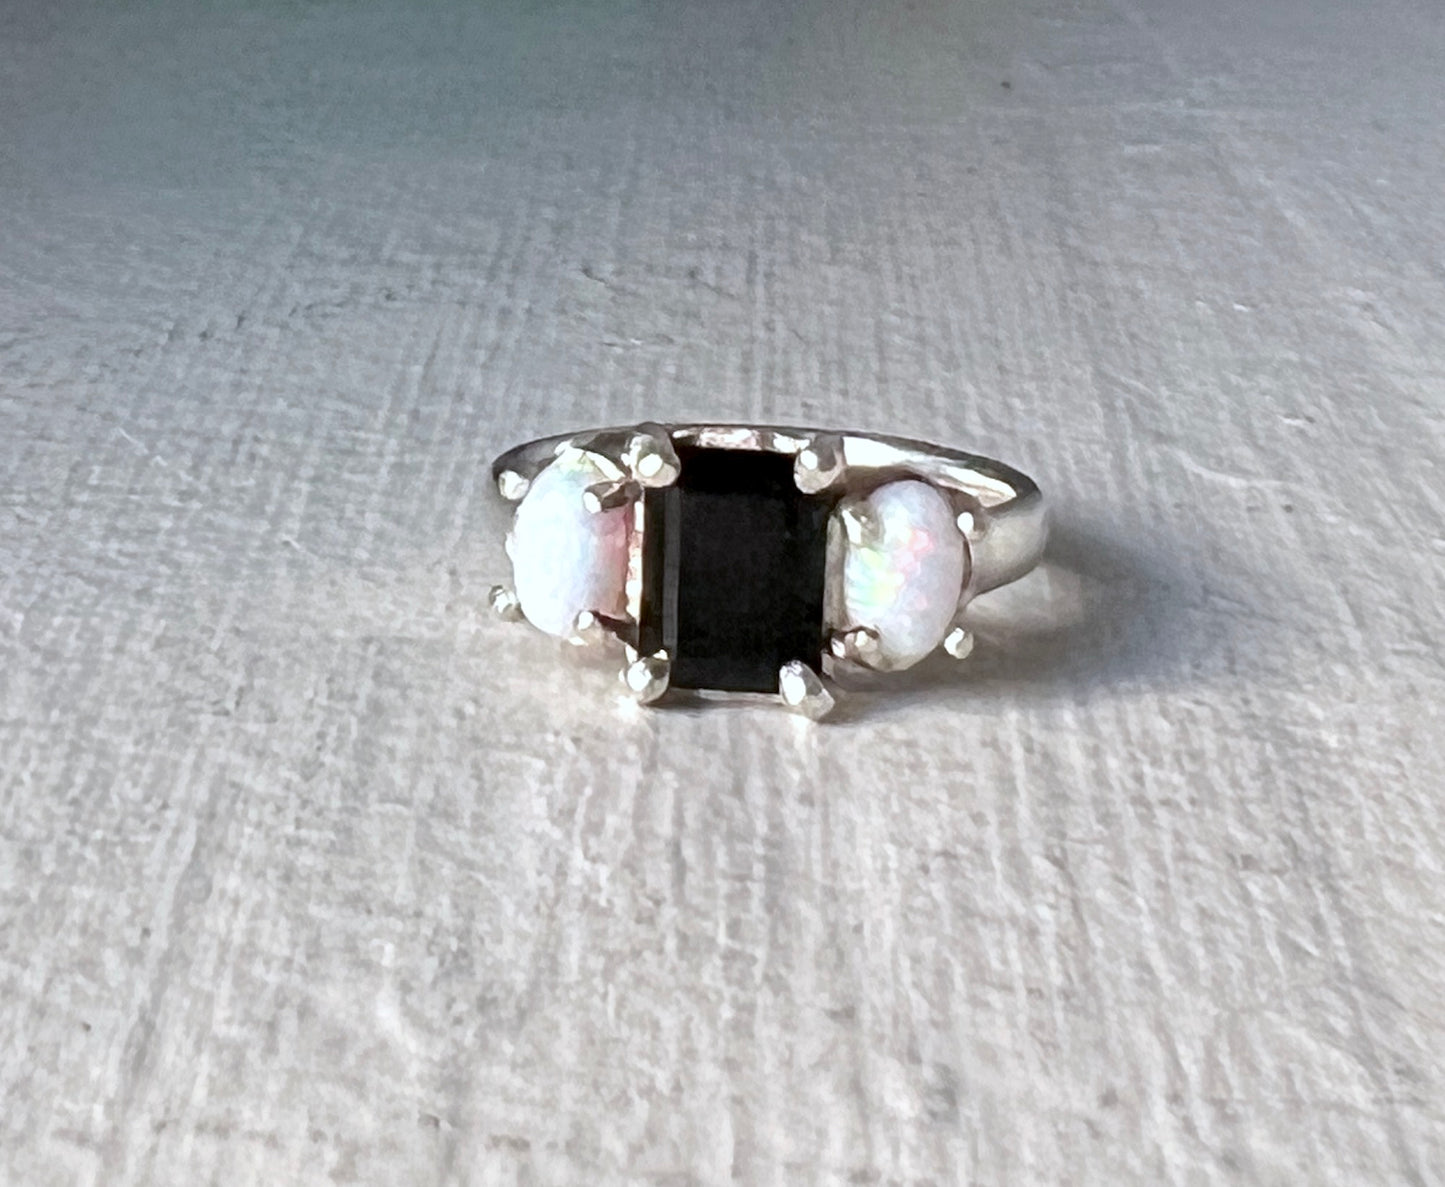 Onyx and Opal Cocktail Ring